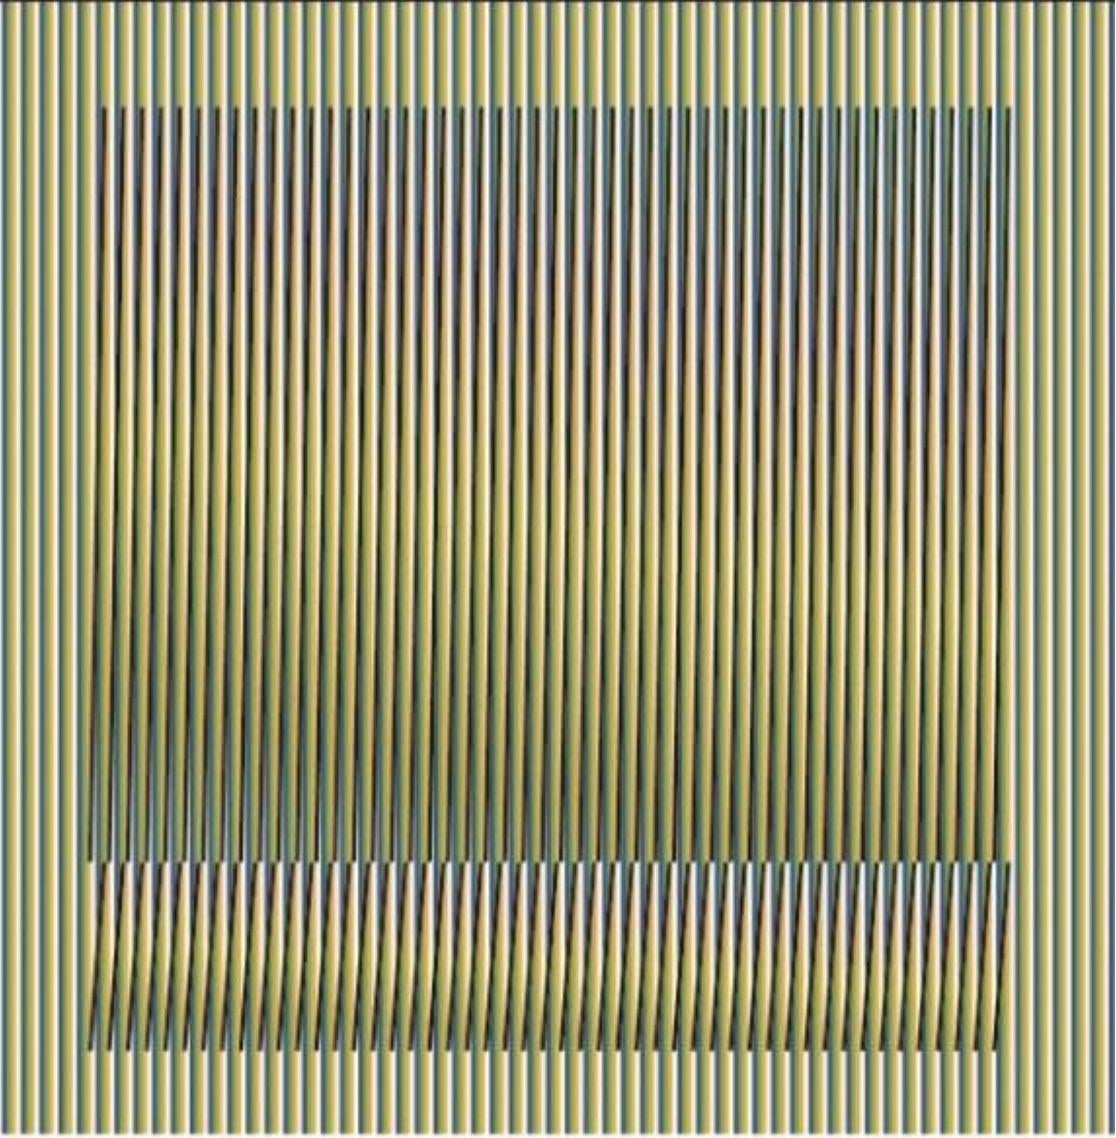 Carlos Cruz-Diez
“Induction Chromatique à Double Fréquence” Série ORINOCO, 2019 (set of 6 works)
Lithograph on Somerset paper
23.62h x 23.62w in
60h x 60w cm
Edition of 75